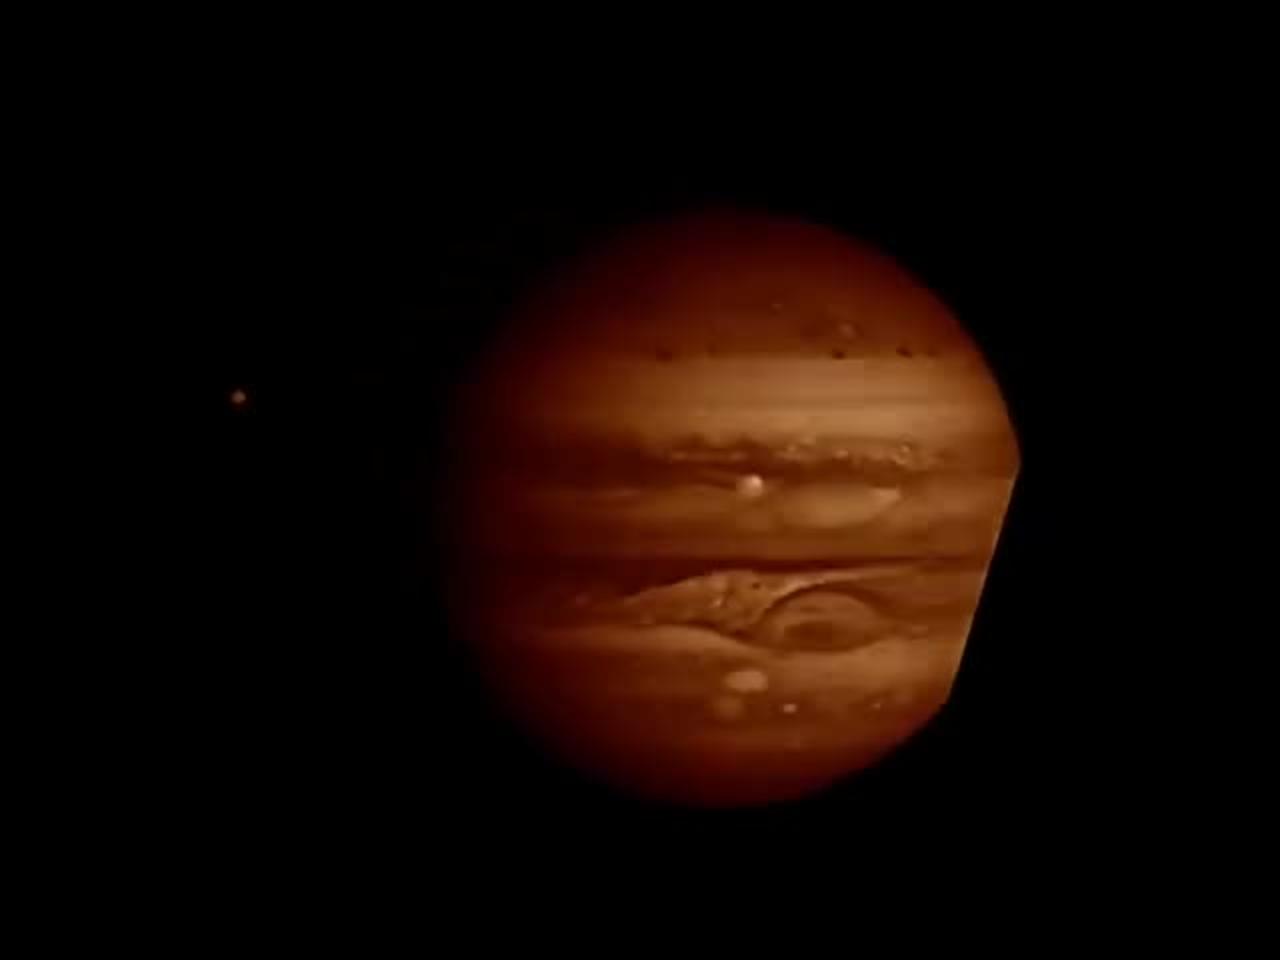 Raw Footage of Jupiter from Voyager 1 (1979) (